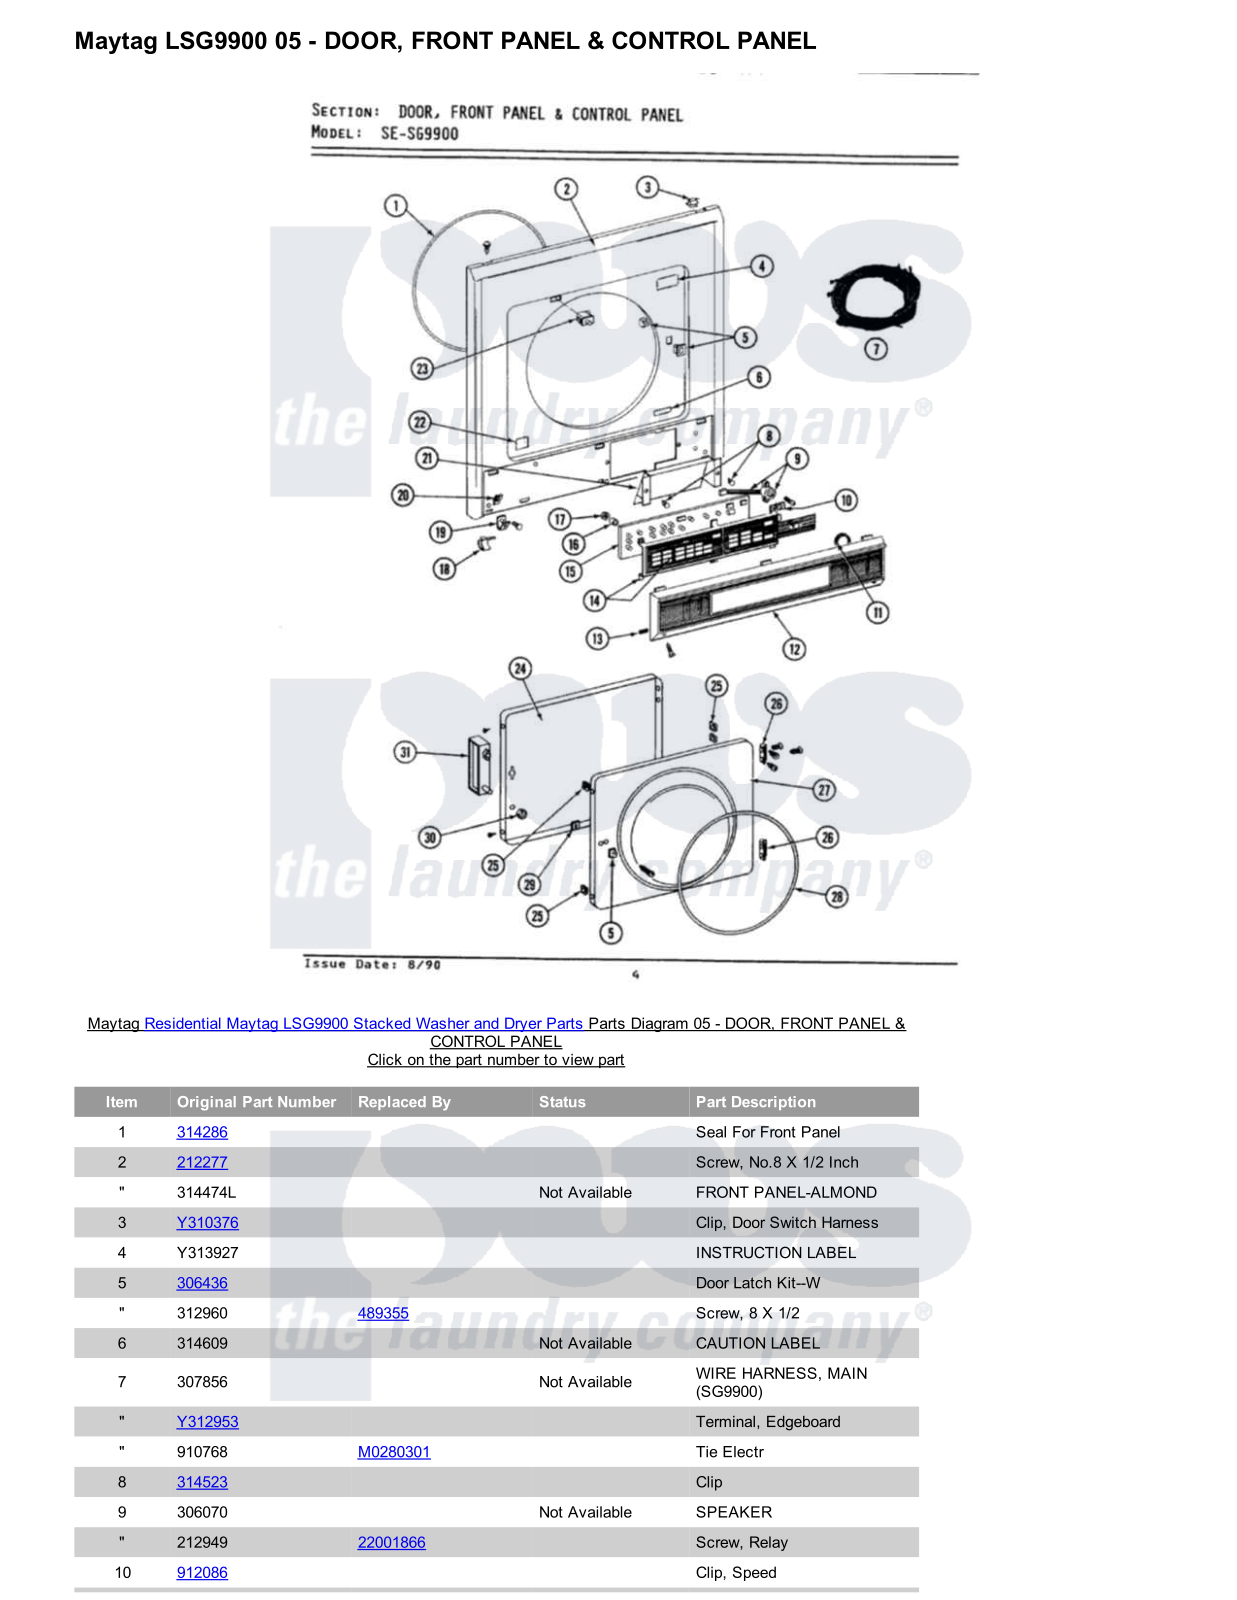 Maytag LSG9900 Stacked and Parts Diagram